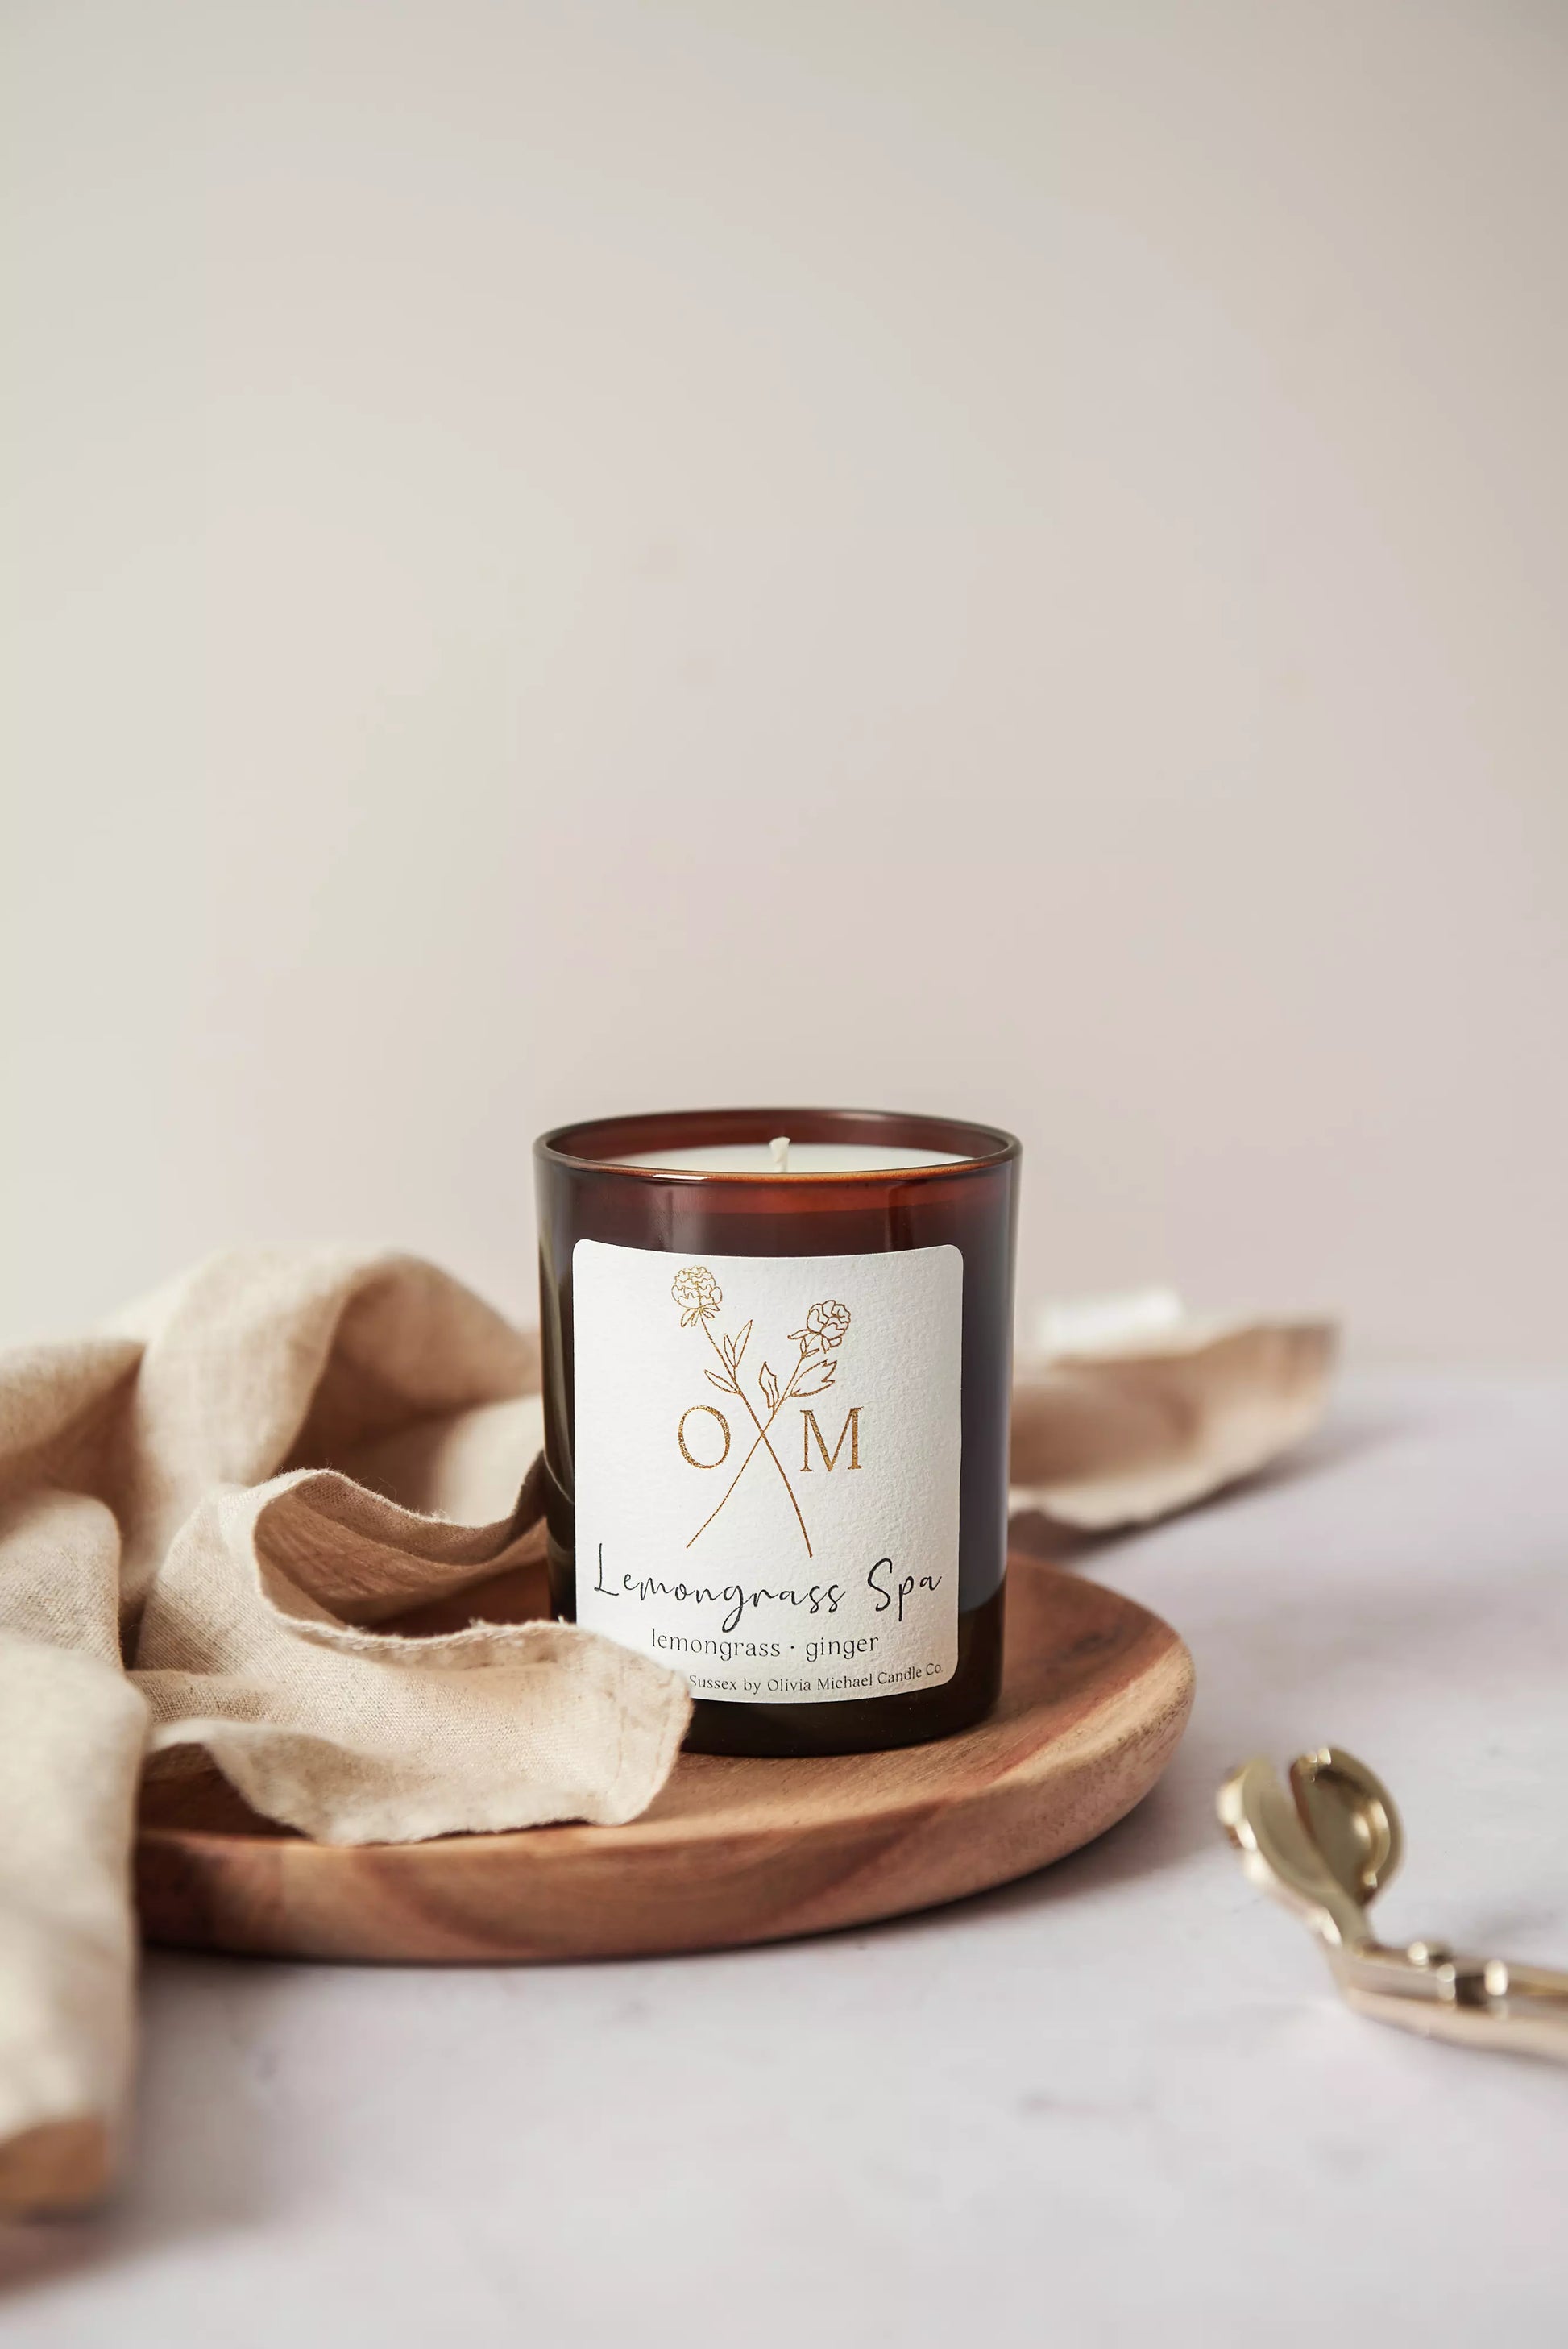 Our lemongrass and ginger scented candle is on display in an amber glass jar.